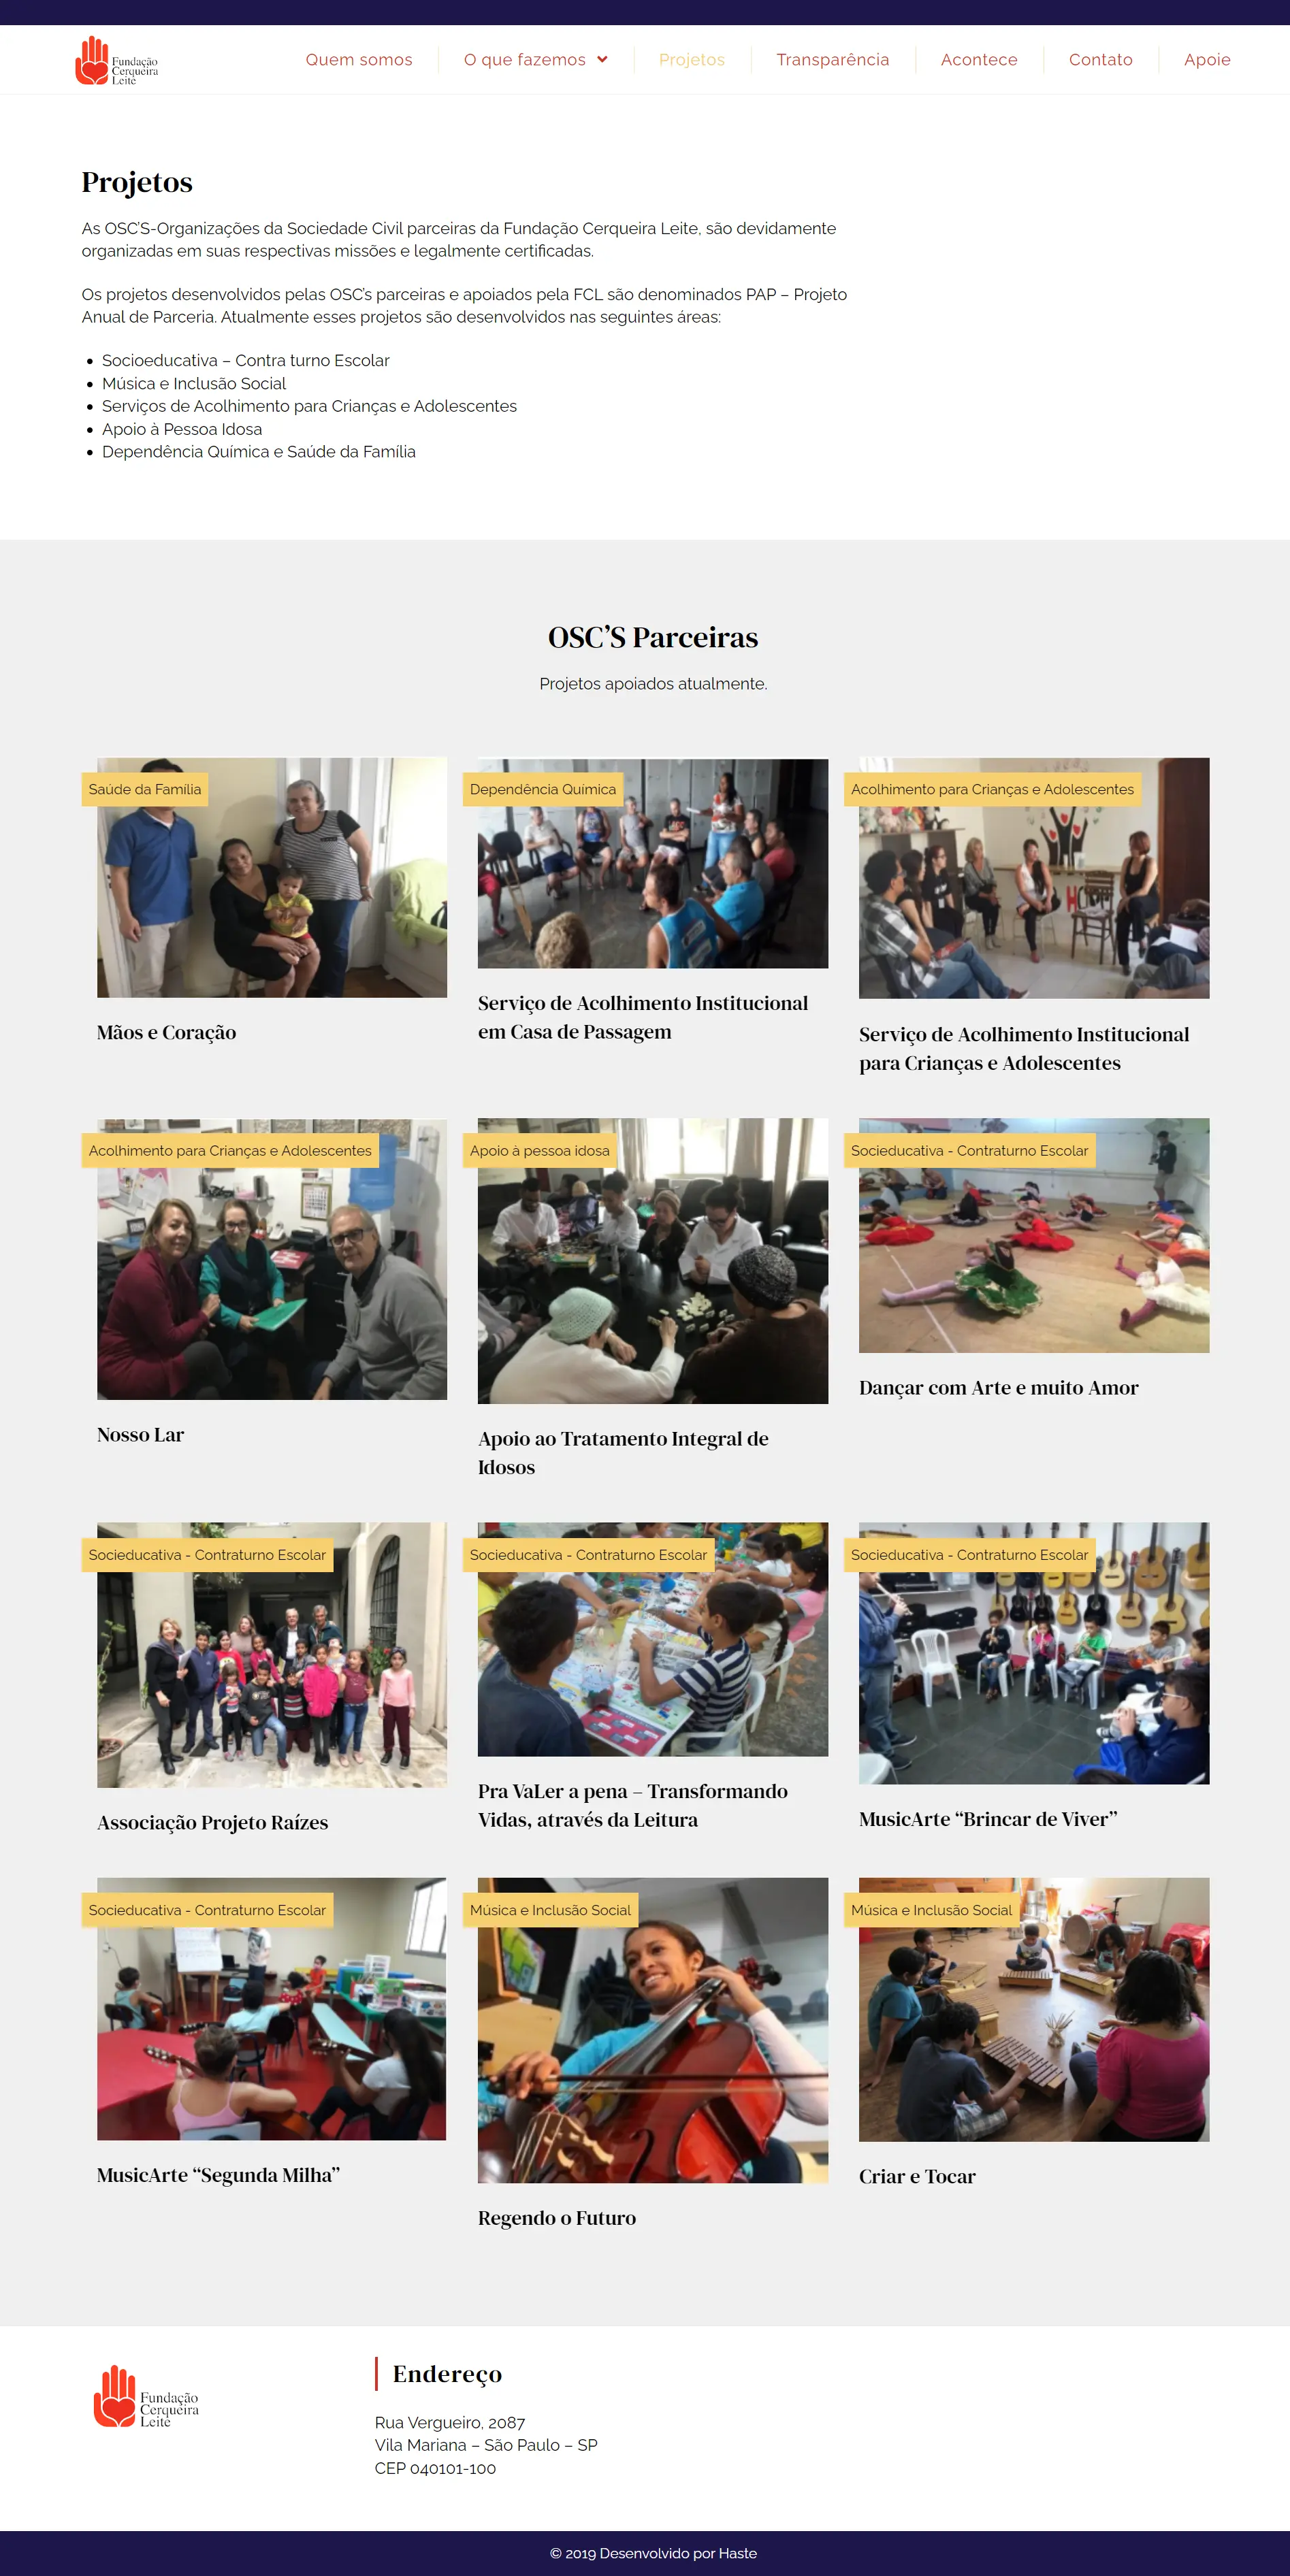 Image of the projects page, on the Cerqueira Leite Foundation website.